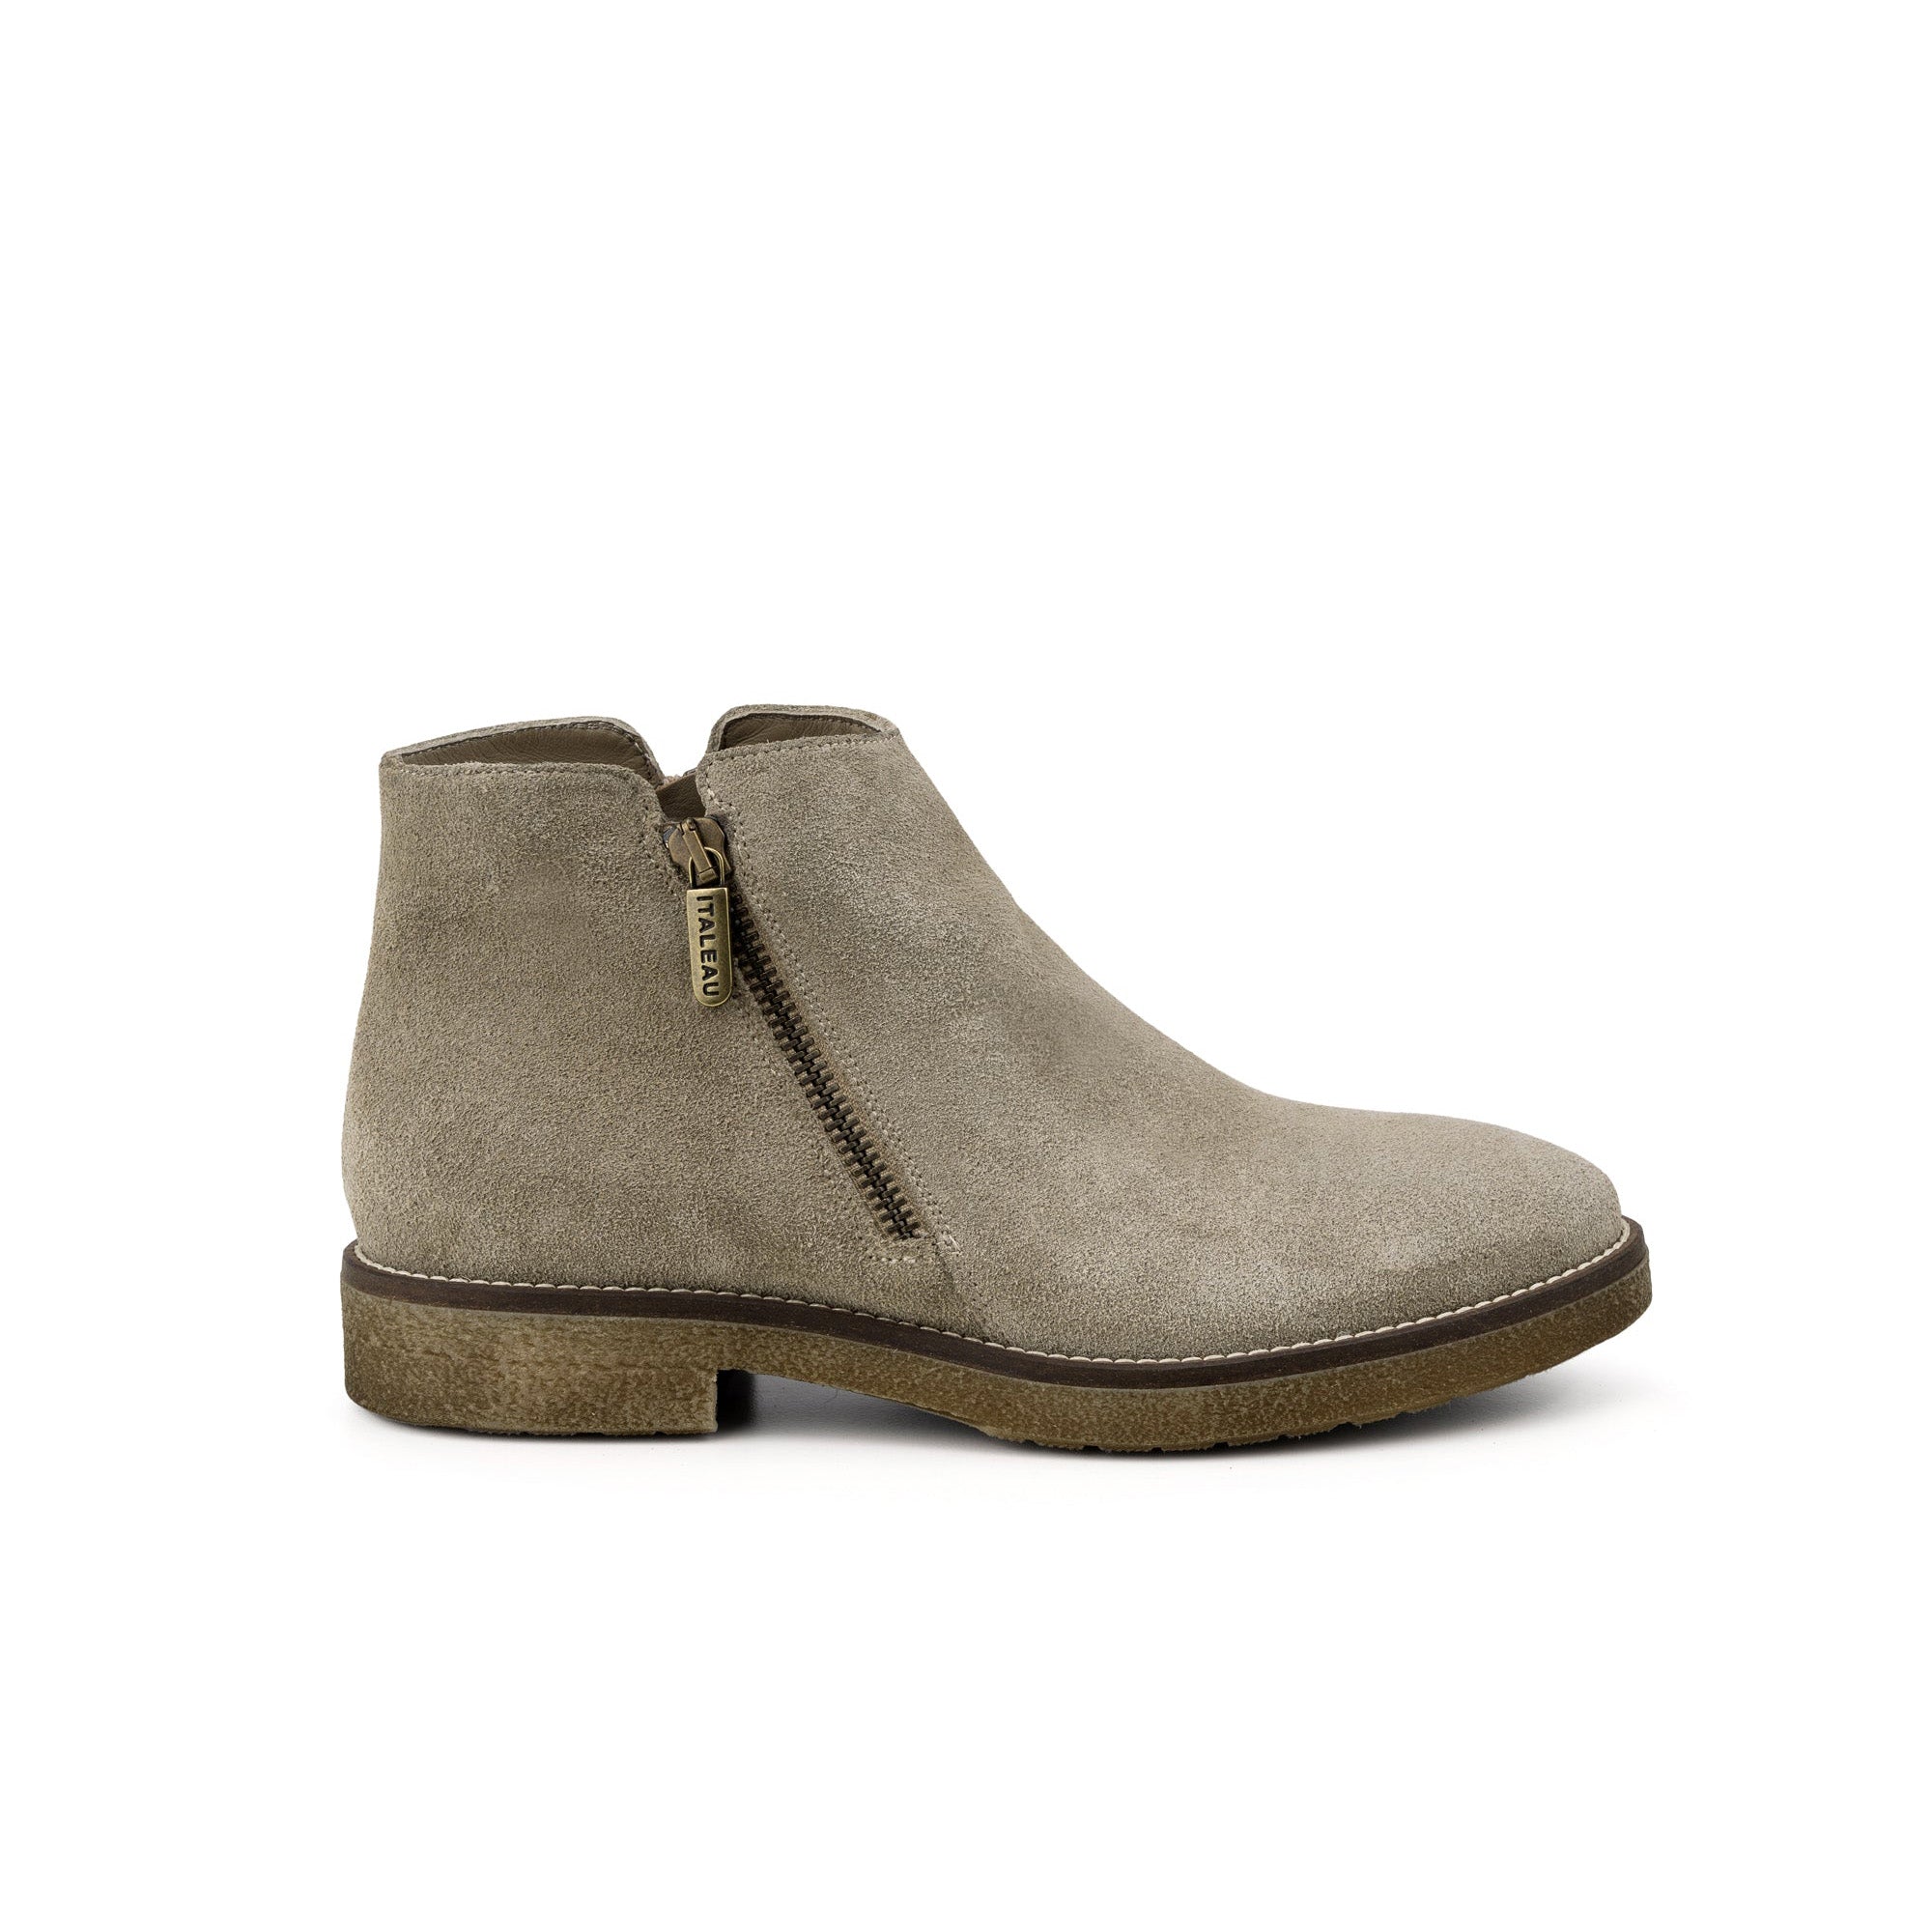 Foliana Ankle Boots | Women’s Ankle Boots | Italian Suede Boots ...